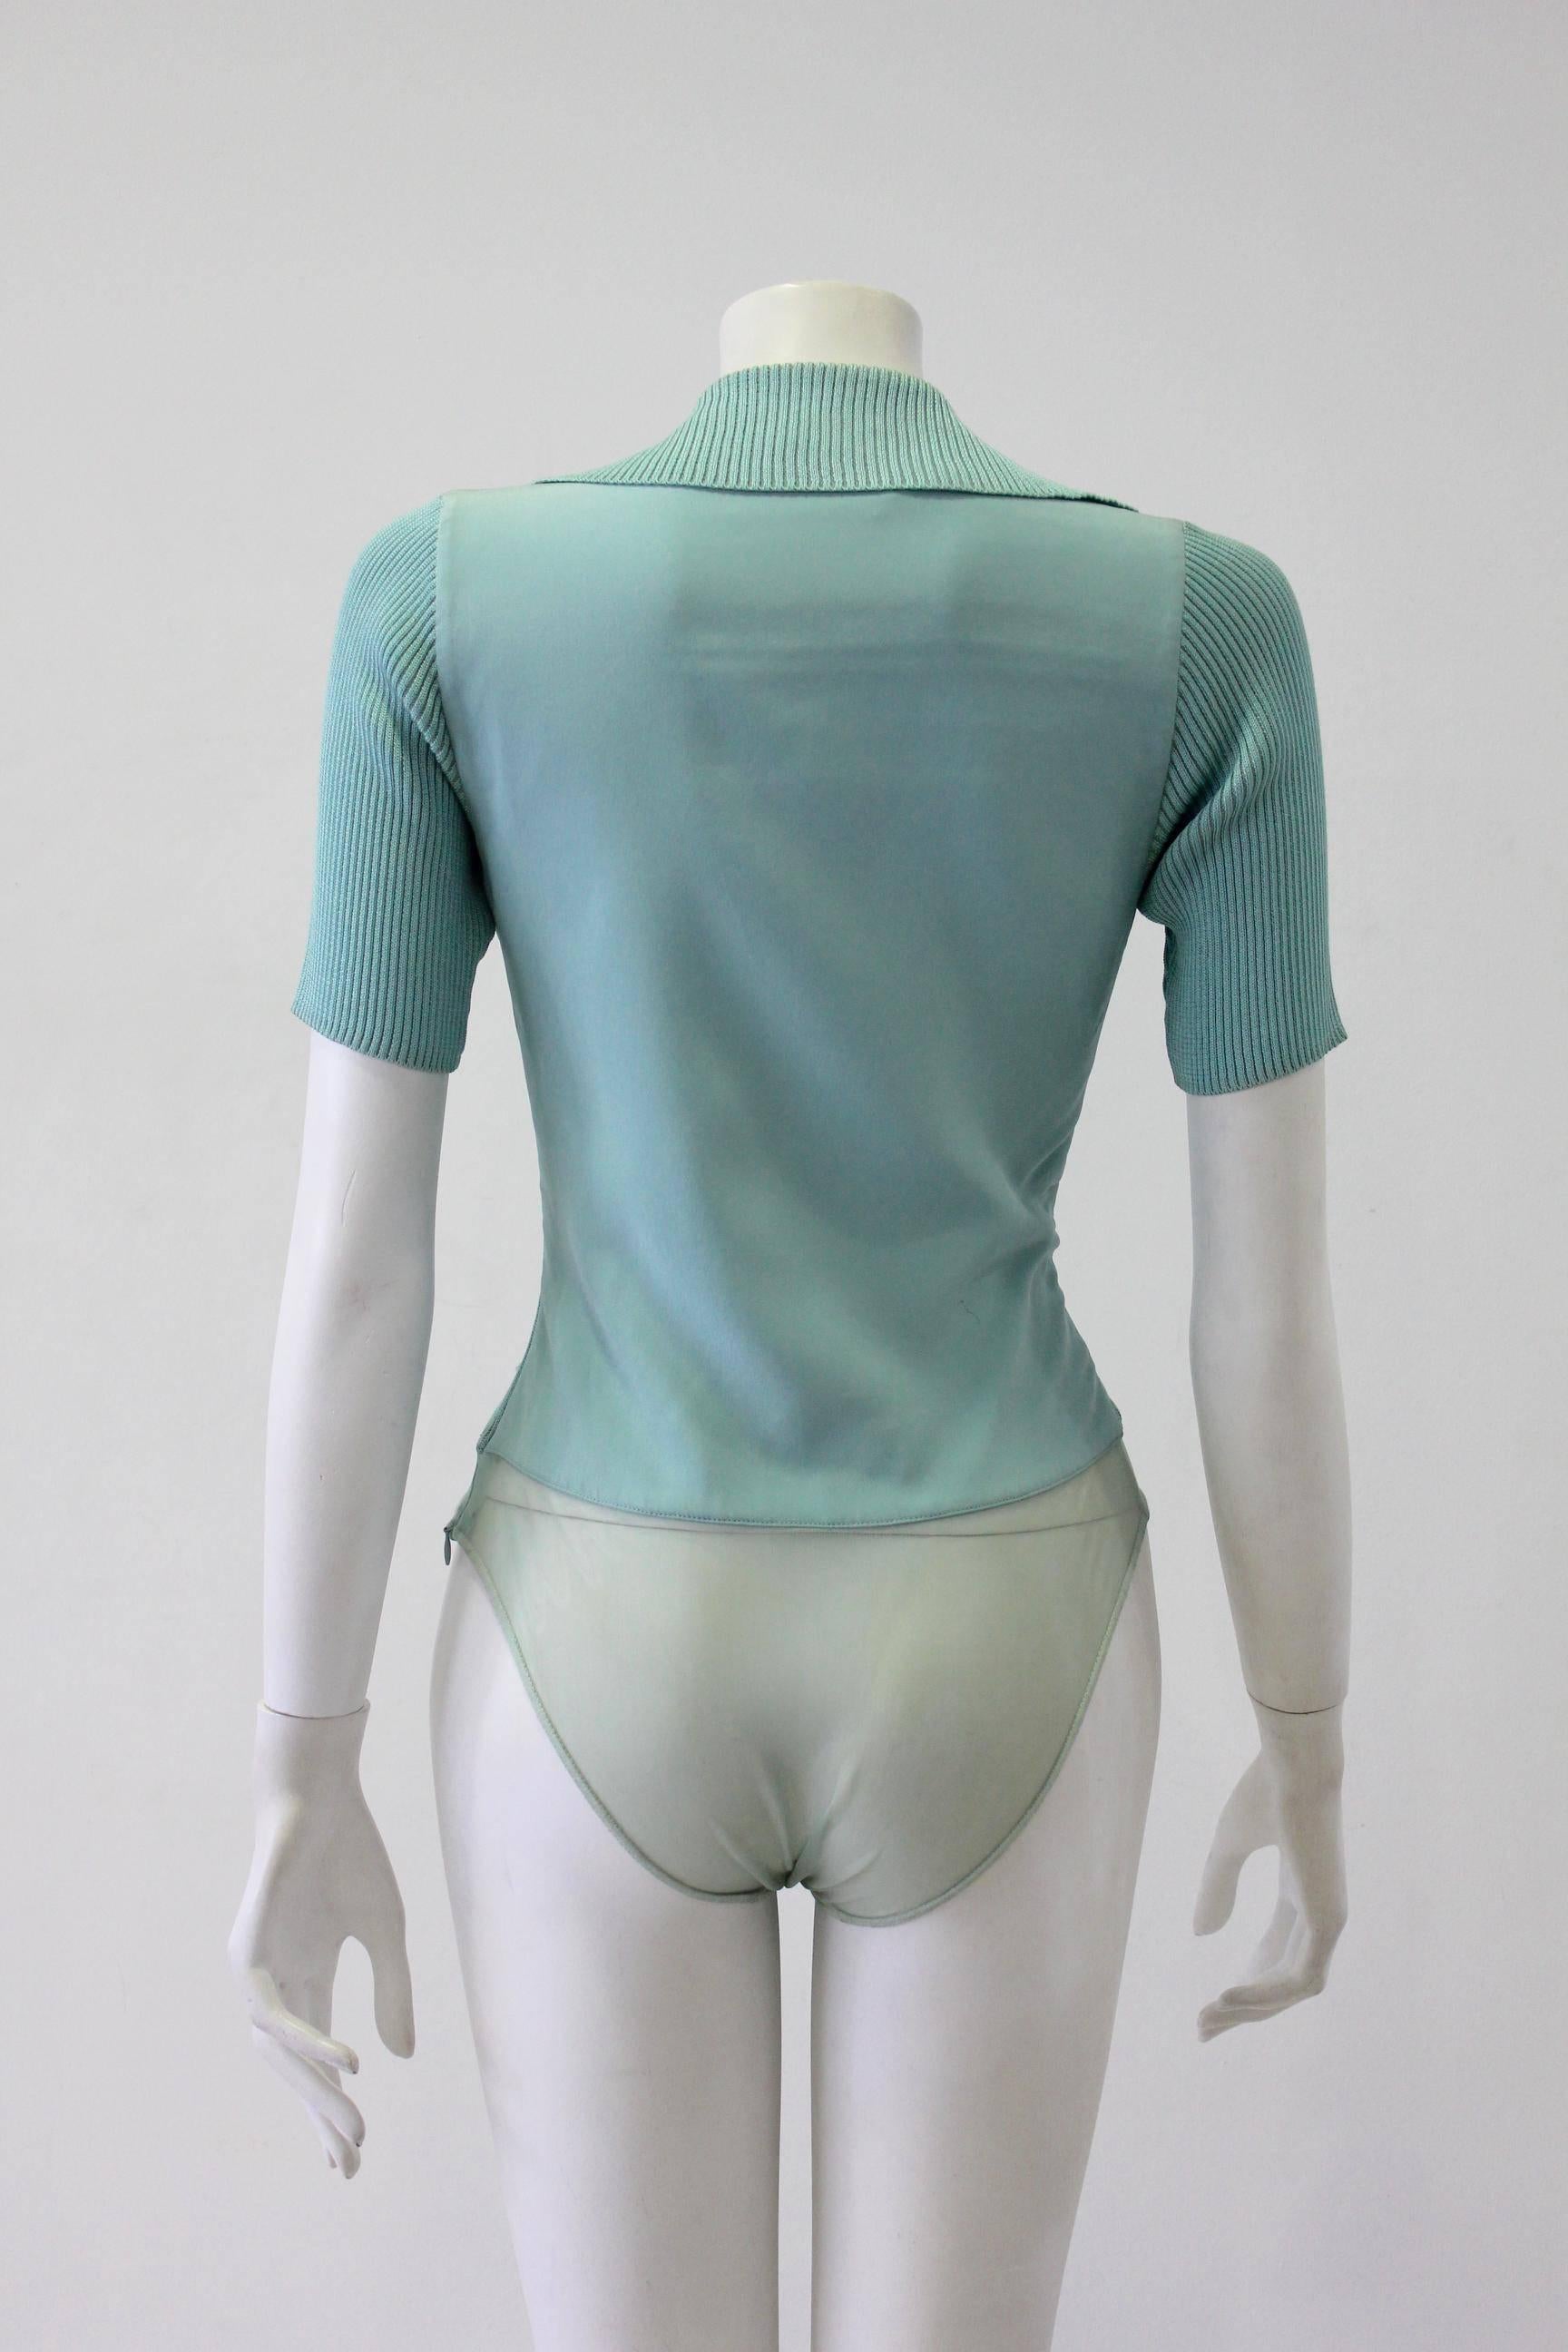 Gianfranco Ferre Body 1990's In New Condition For Sale In Athens, Agia Paraskevi